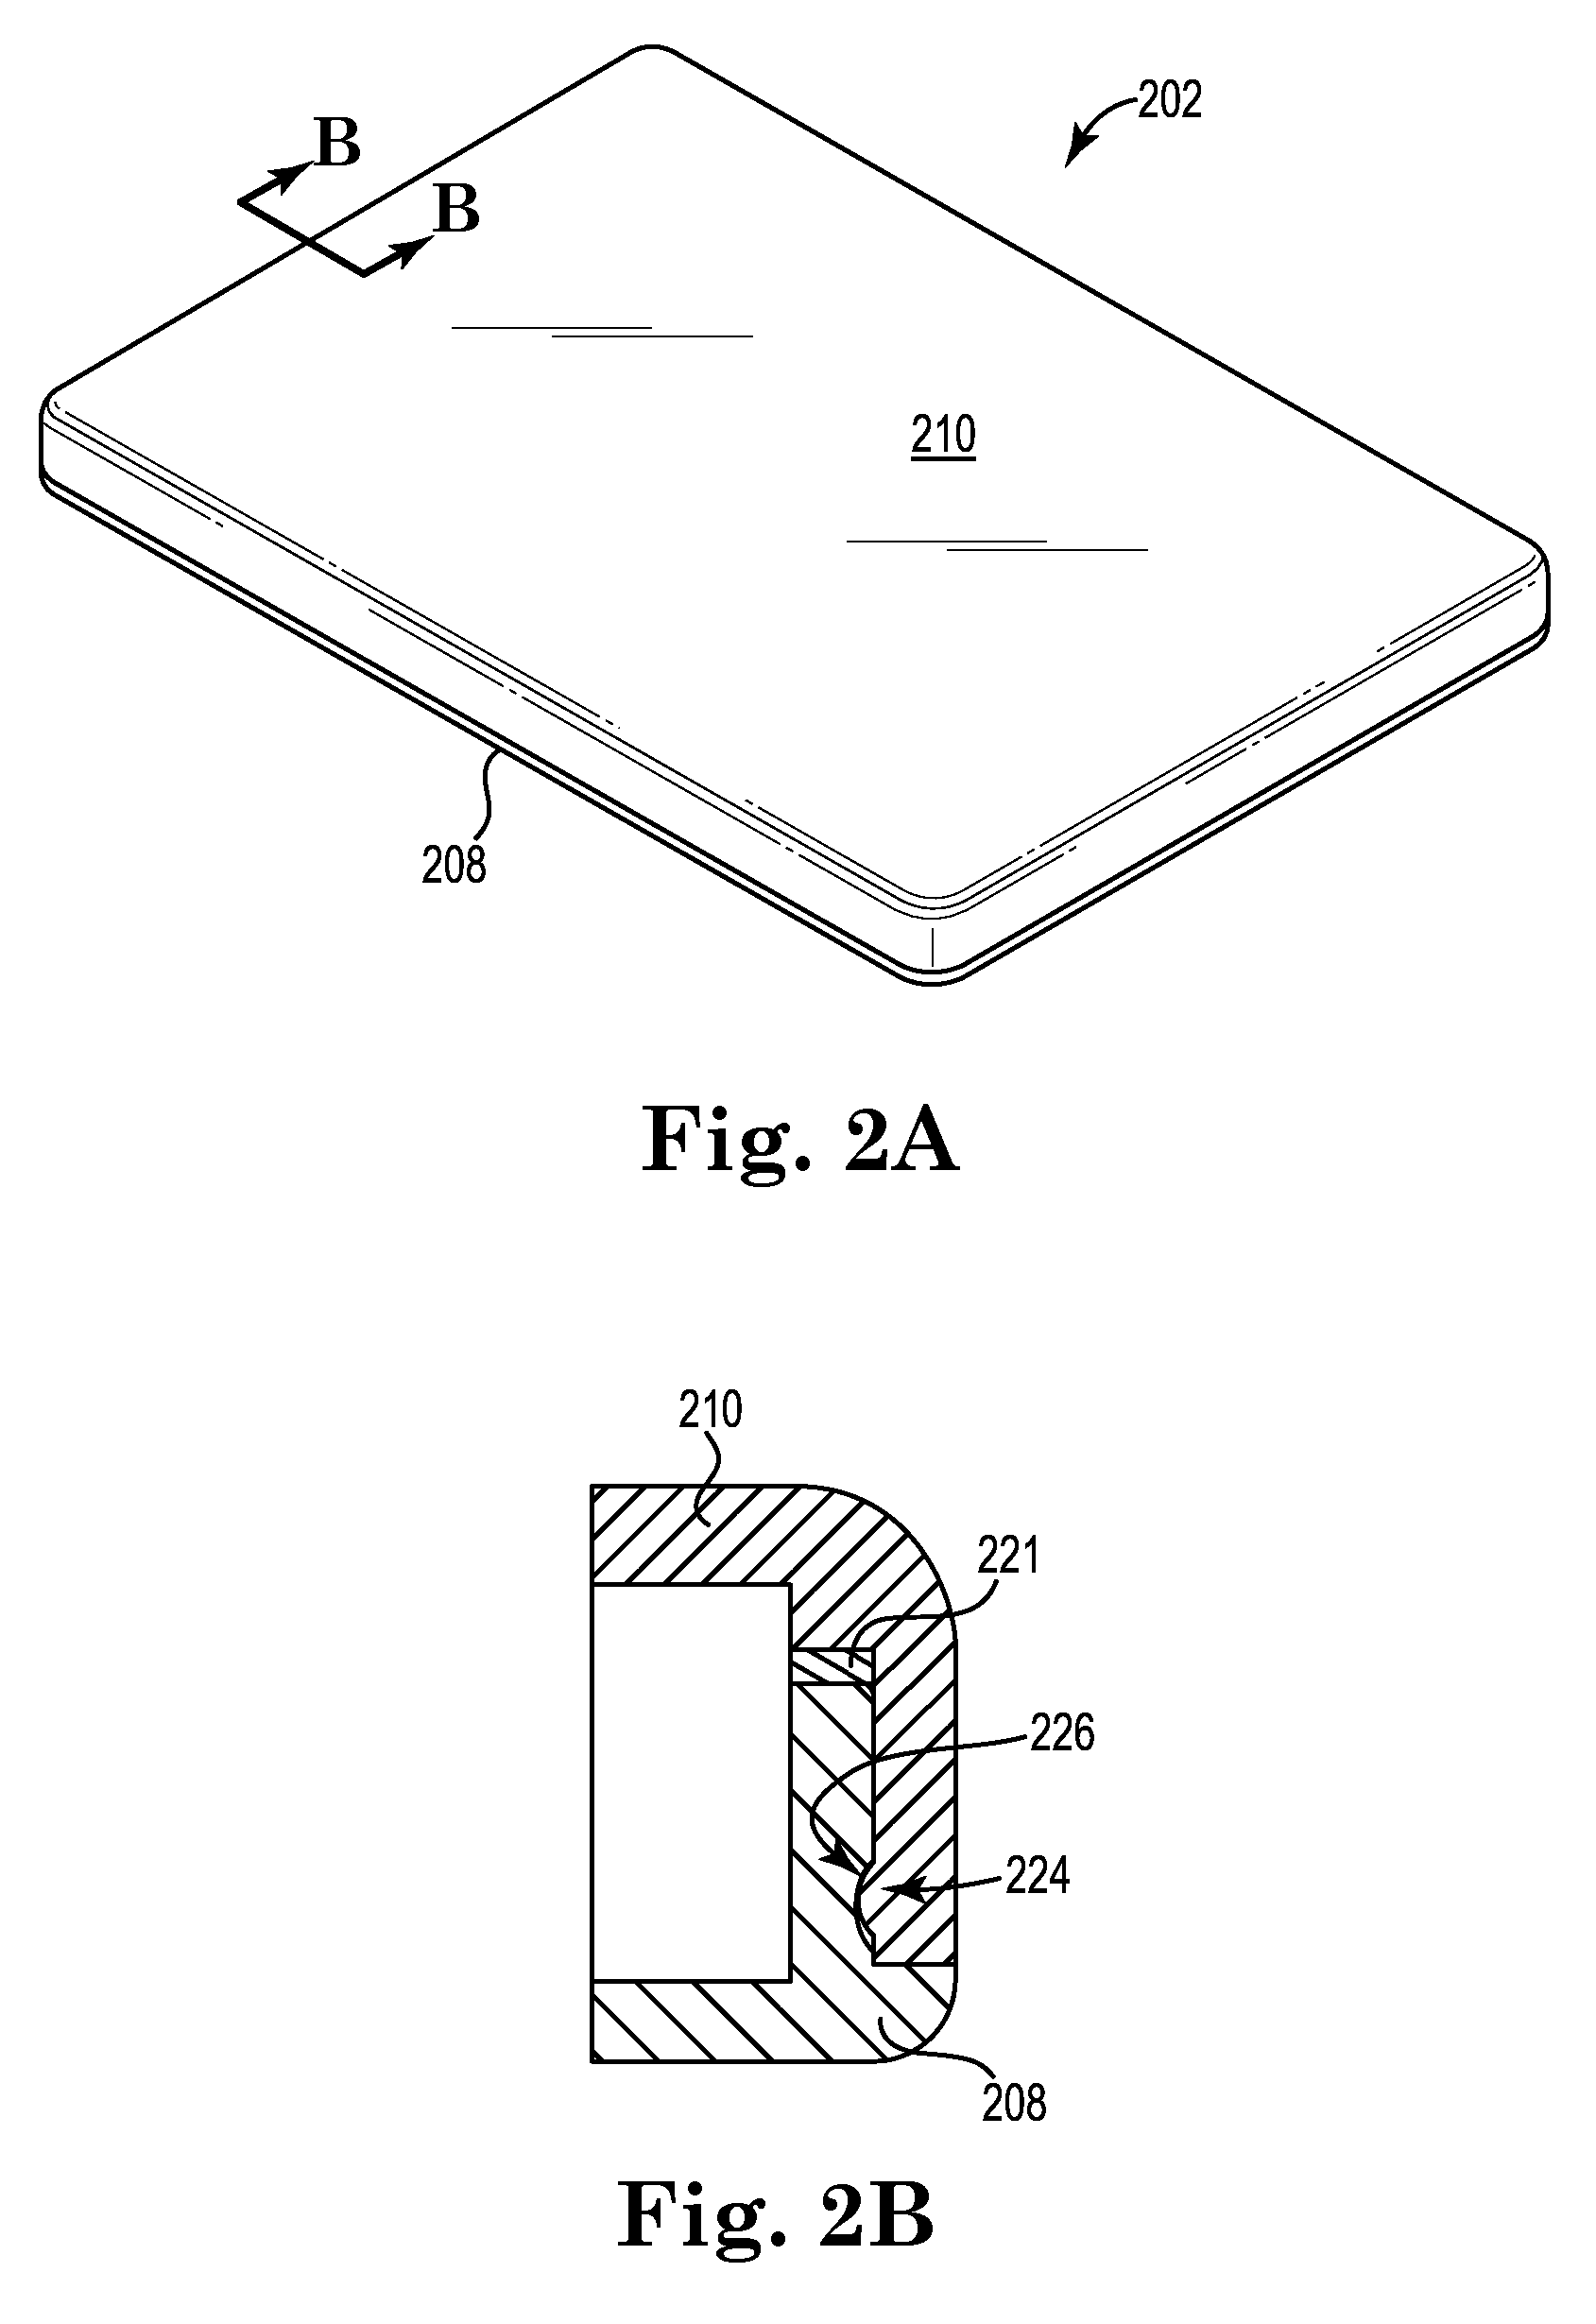 Coupling of Hard Disk Drive Housing and Related Methods